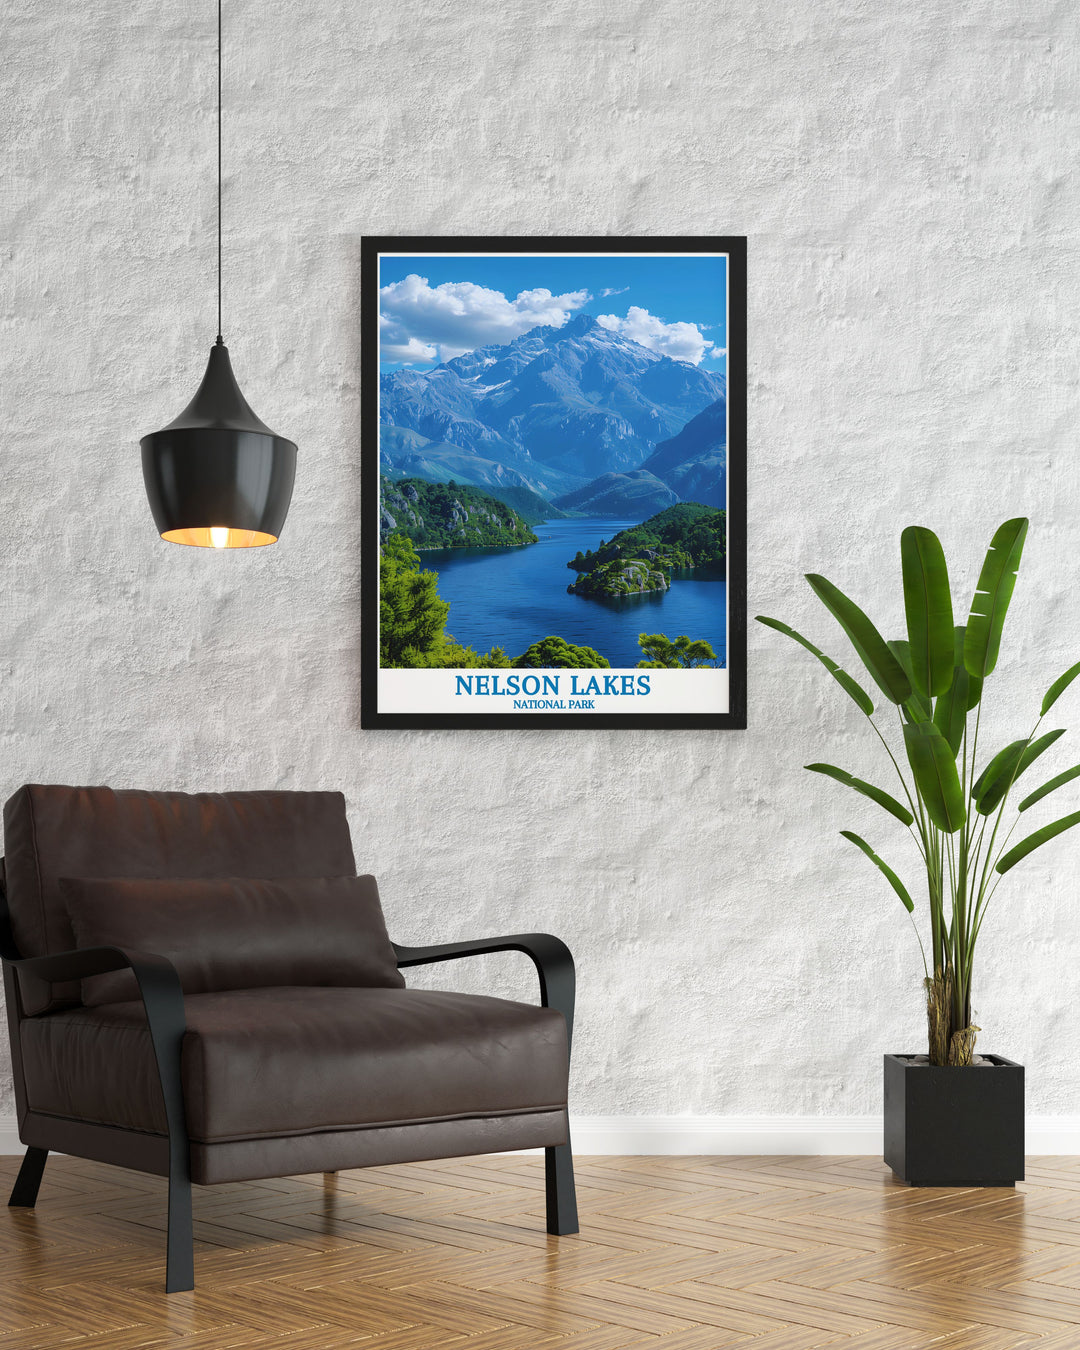 Stunning Lake Rotoiti calm waters and scenic views prints capturing the peaceful landscapes of this iconic New Zealand location ideal for enhancing any room with a touch of natural beauty and inspiring a love for New Zealand travel.